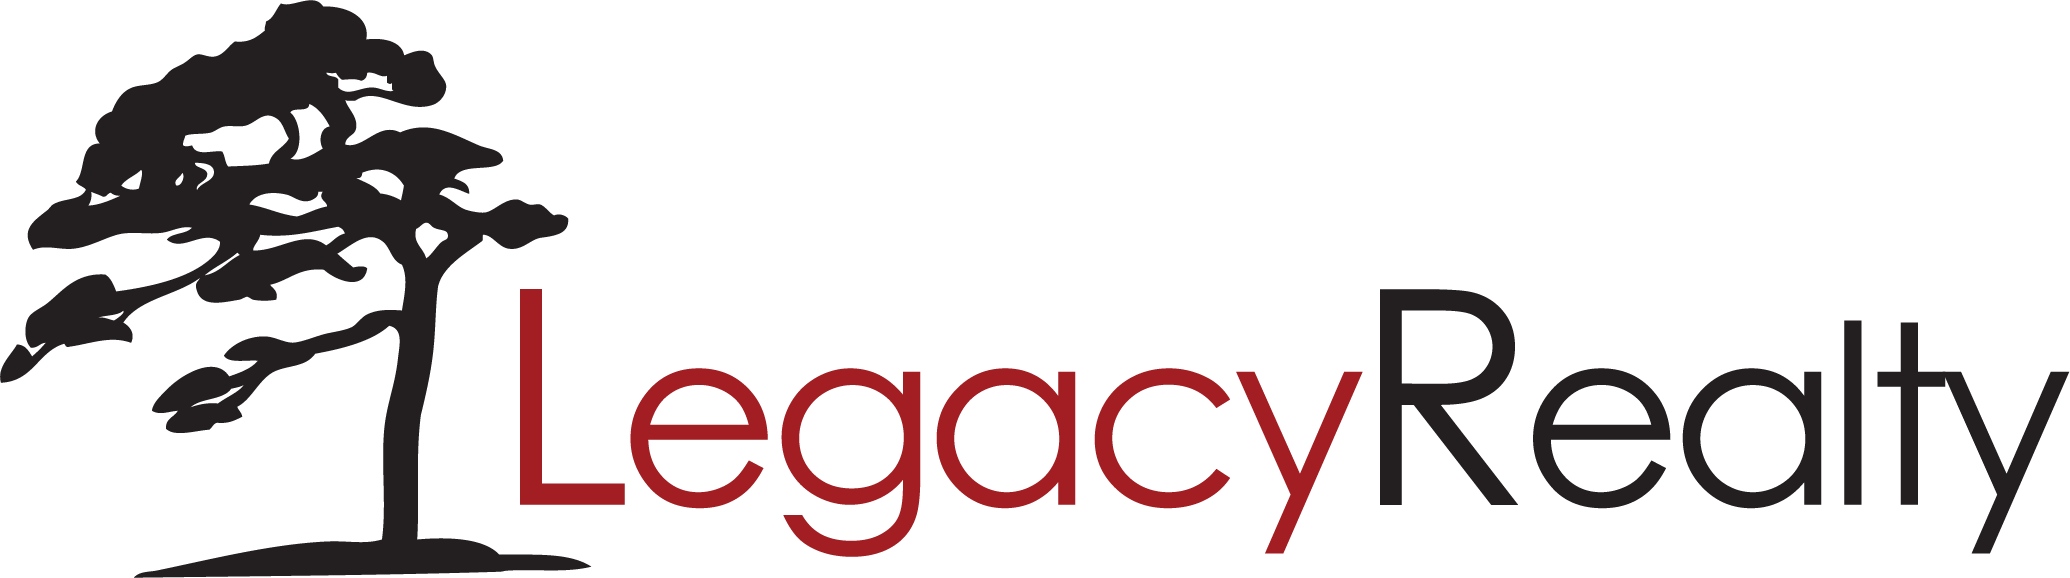 Legacy Realty Online